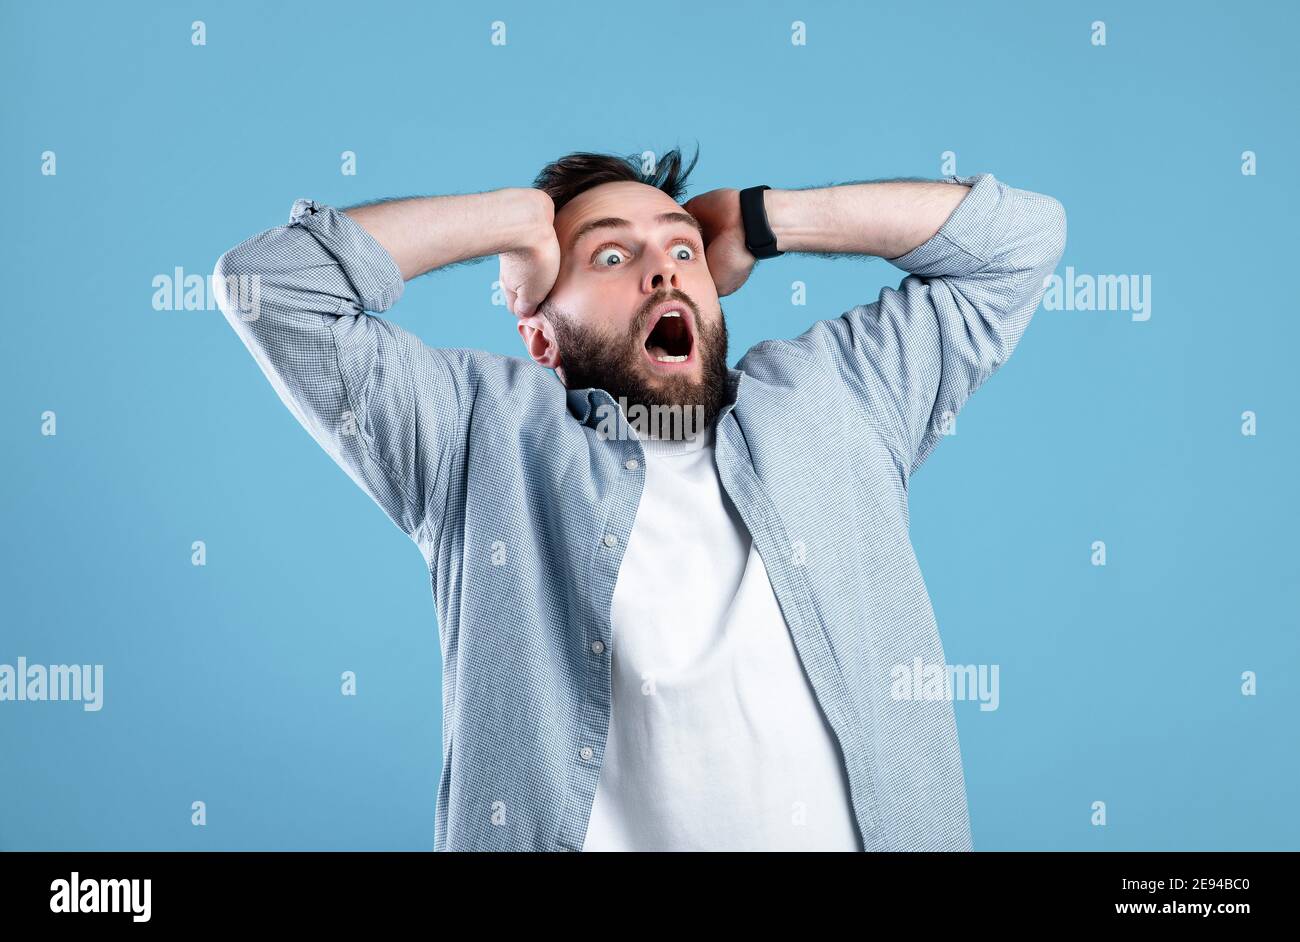 Shocking offer. Extremely surprised young guy shouting OMG in disbelief on blue studio background Stock Photo